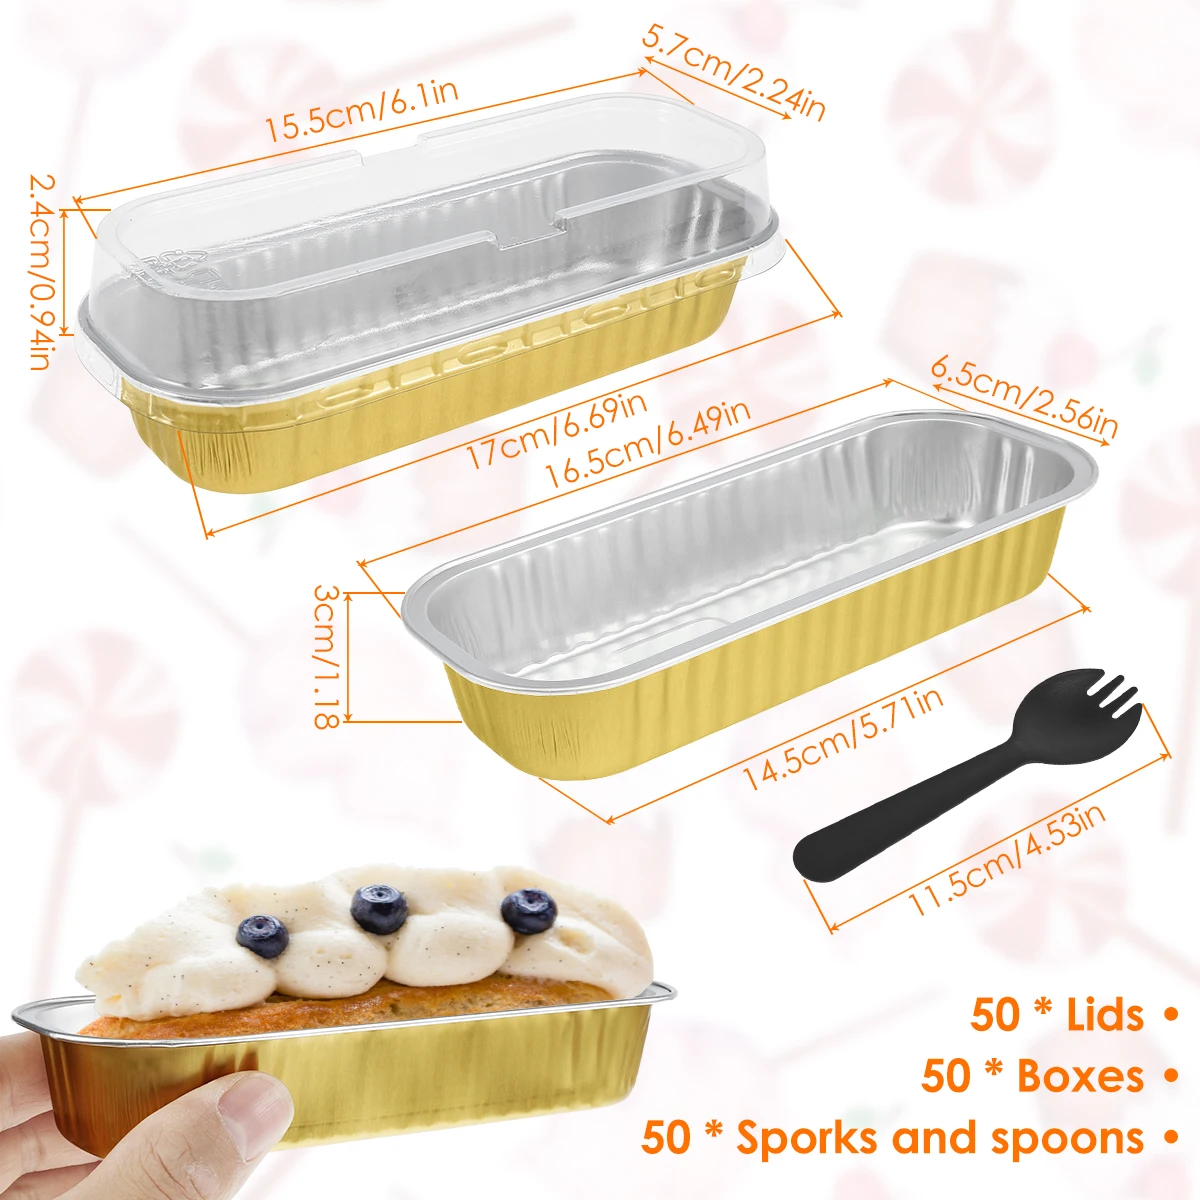 50pcs, Loaf Bread Baking Liners, Disposable Loaf Pan Liners, Non-stick  Paper Cake Pan Liners, Baking Tools, Kitchen Gadgets, Kitchen Accessories